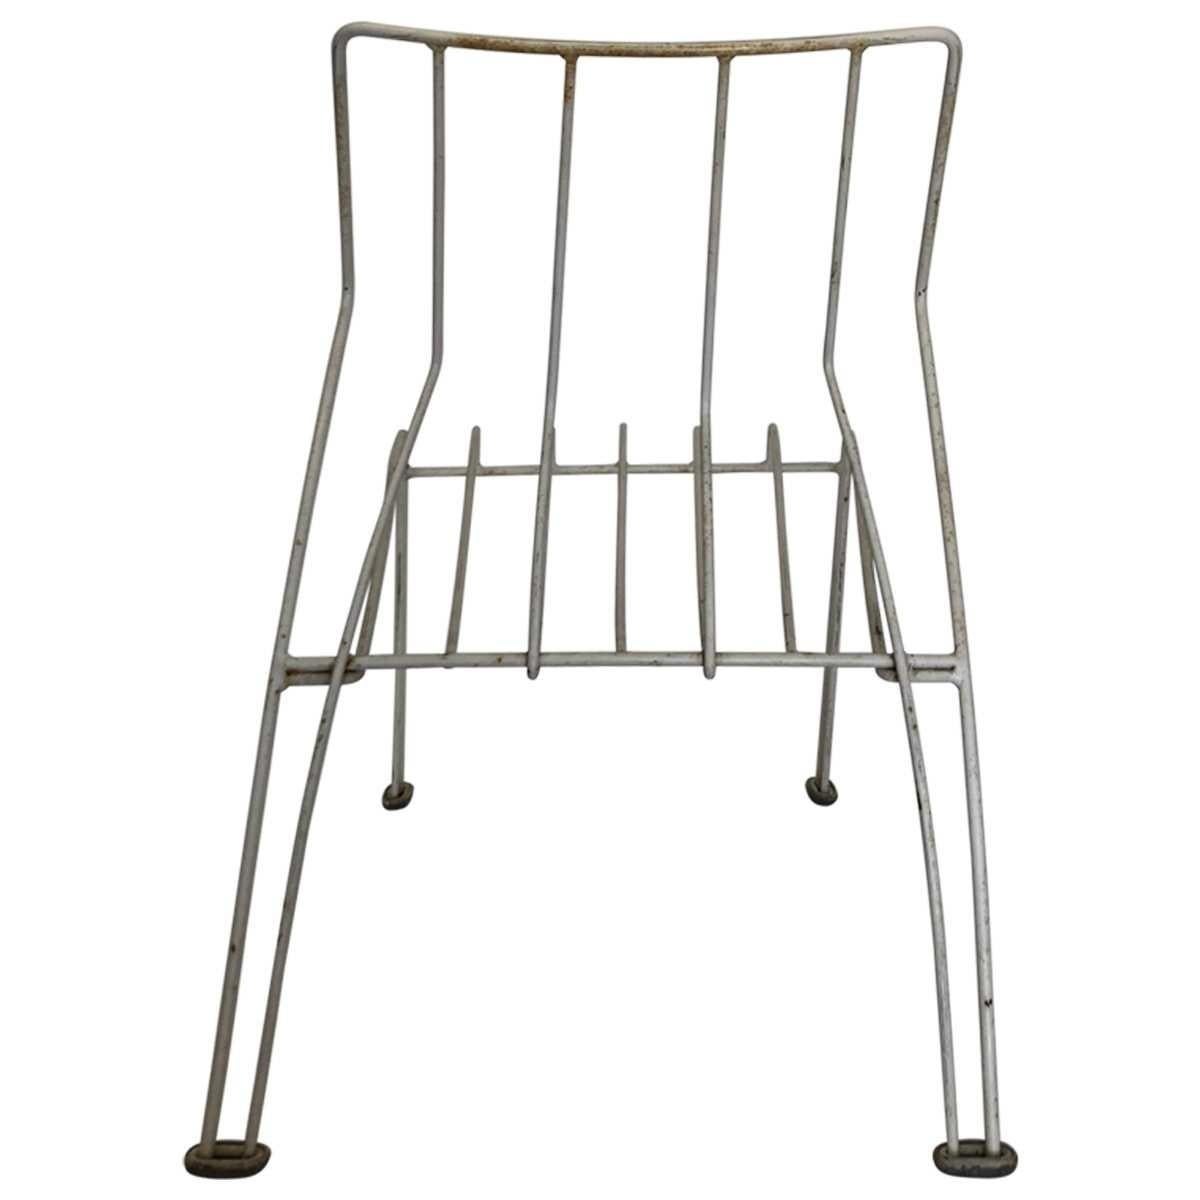 20th Century Trio of Stack-able Steel Garden Chairs, 1970-1979 For Sale